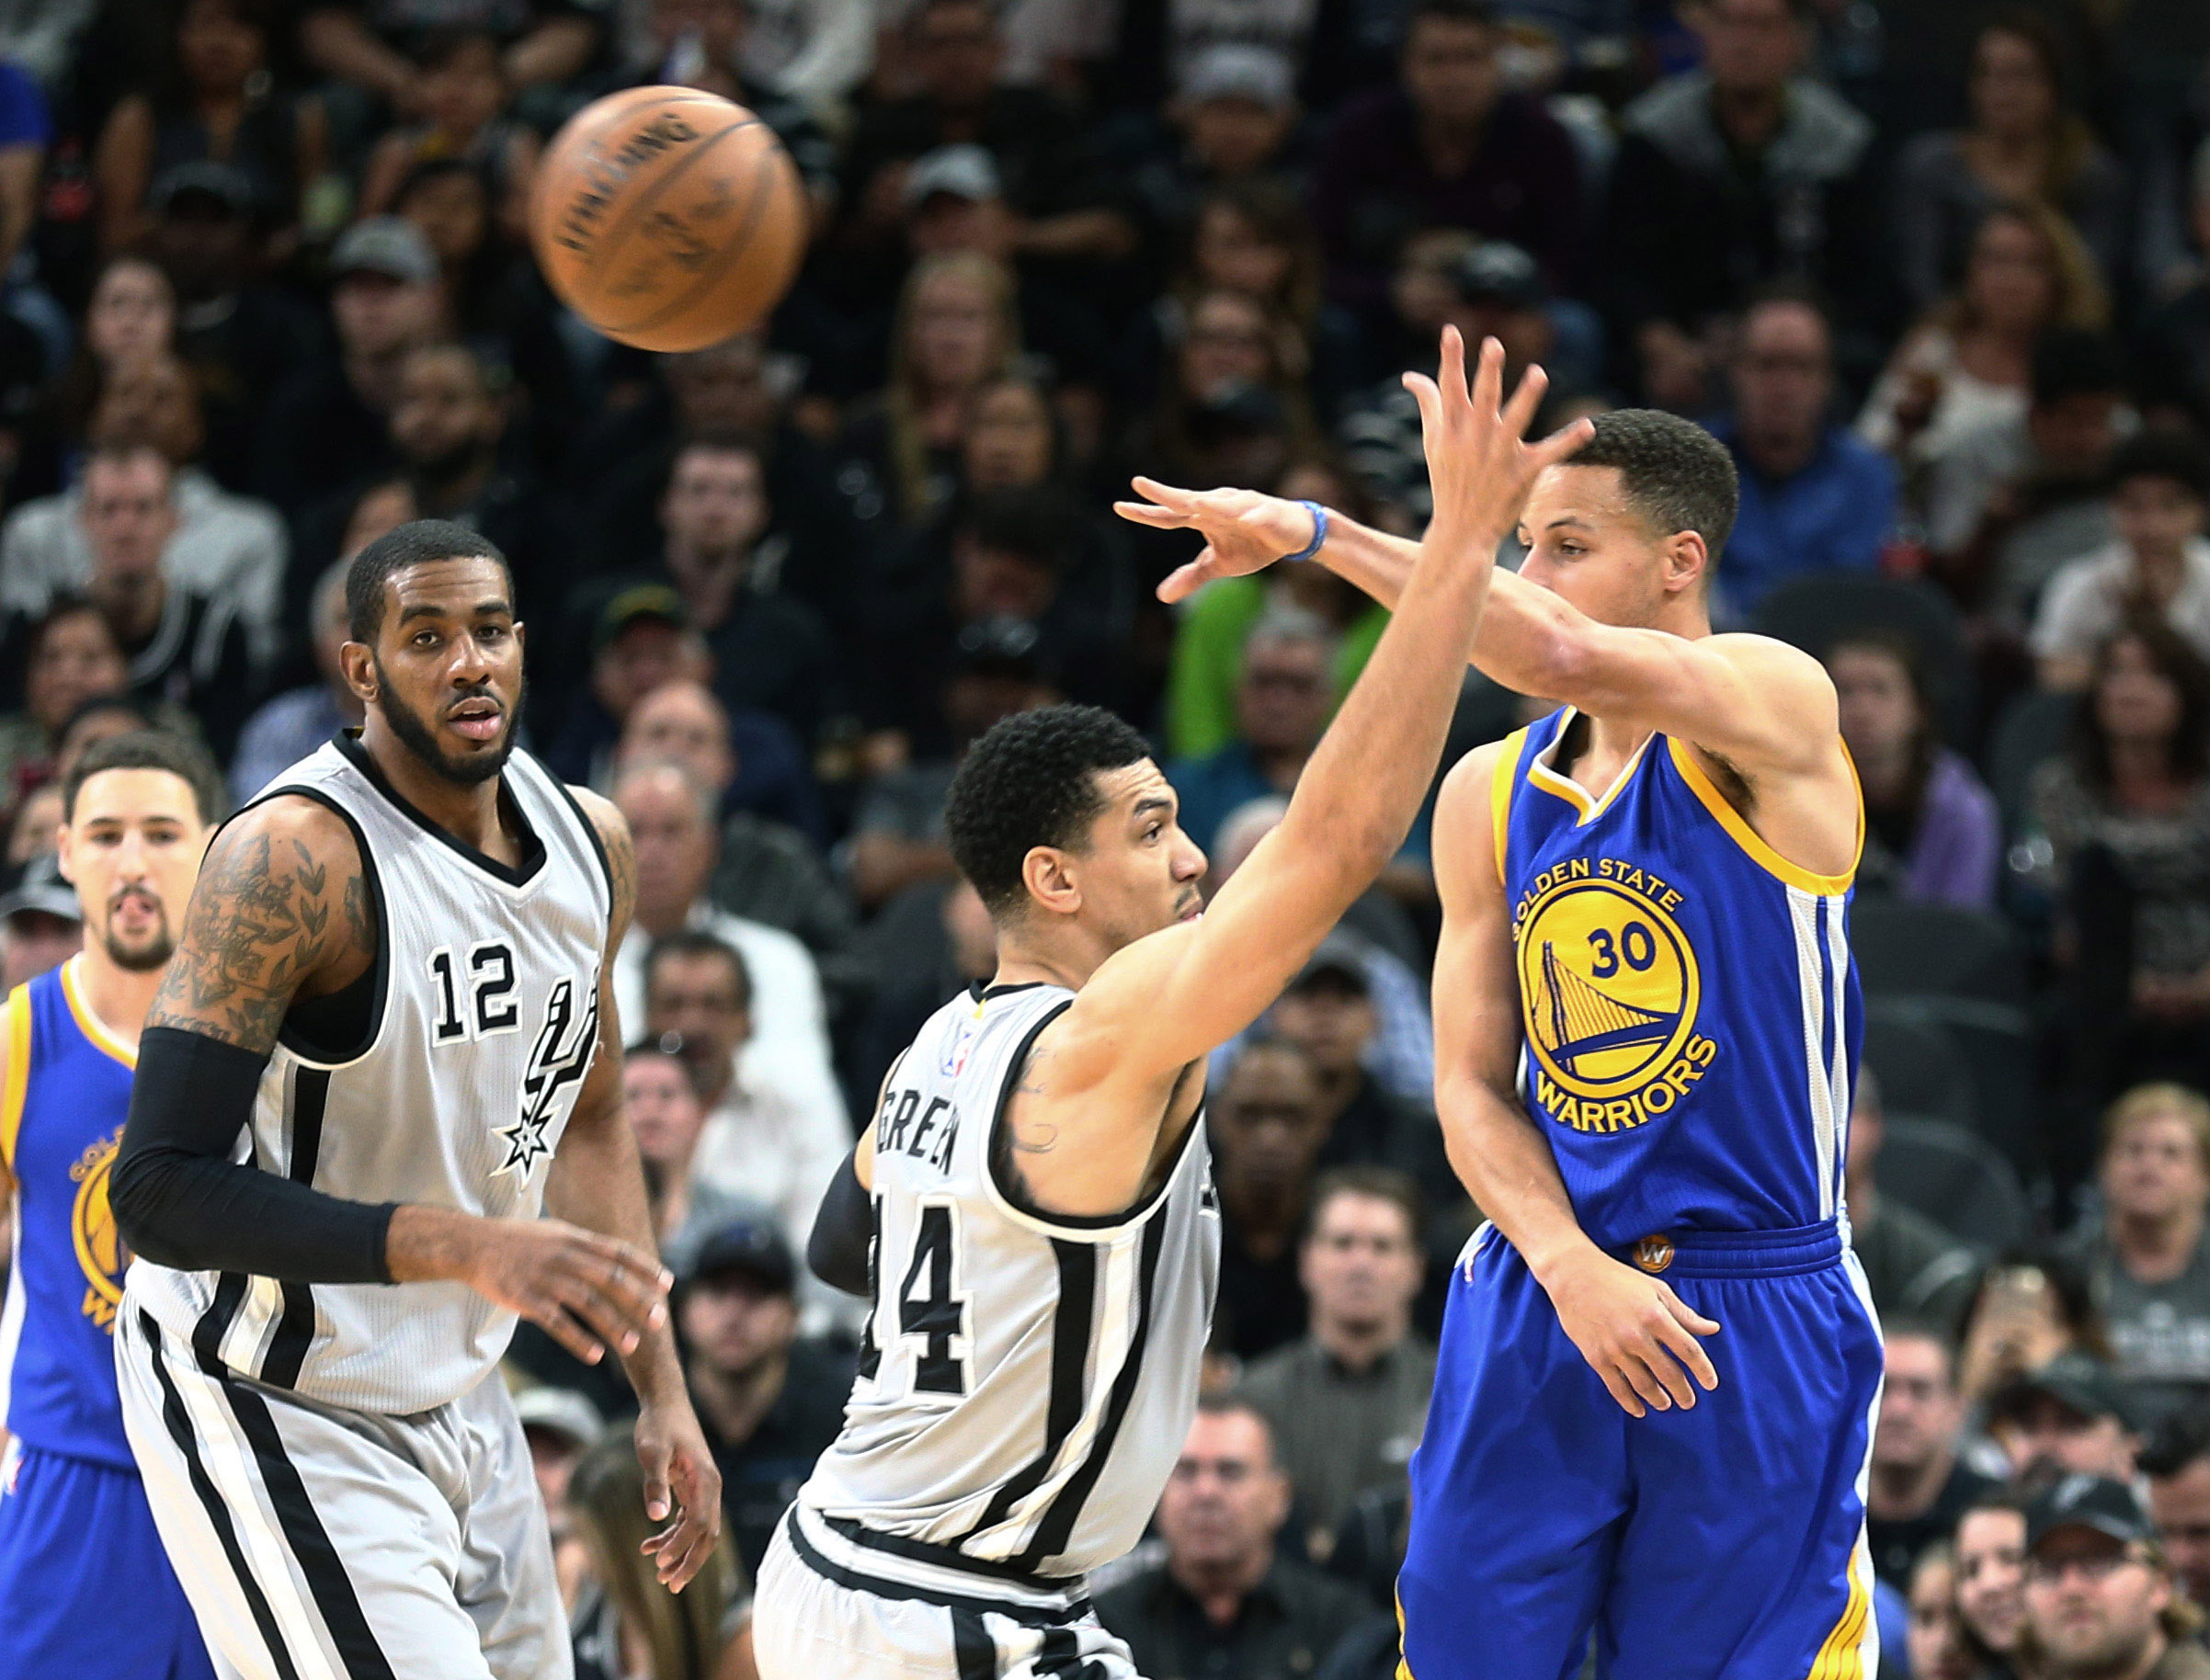 Warriors' biggest strategic X-factor in playoff clash with Kings